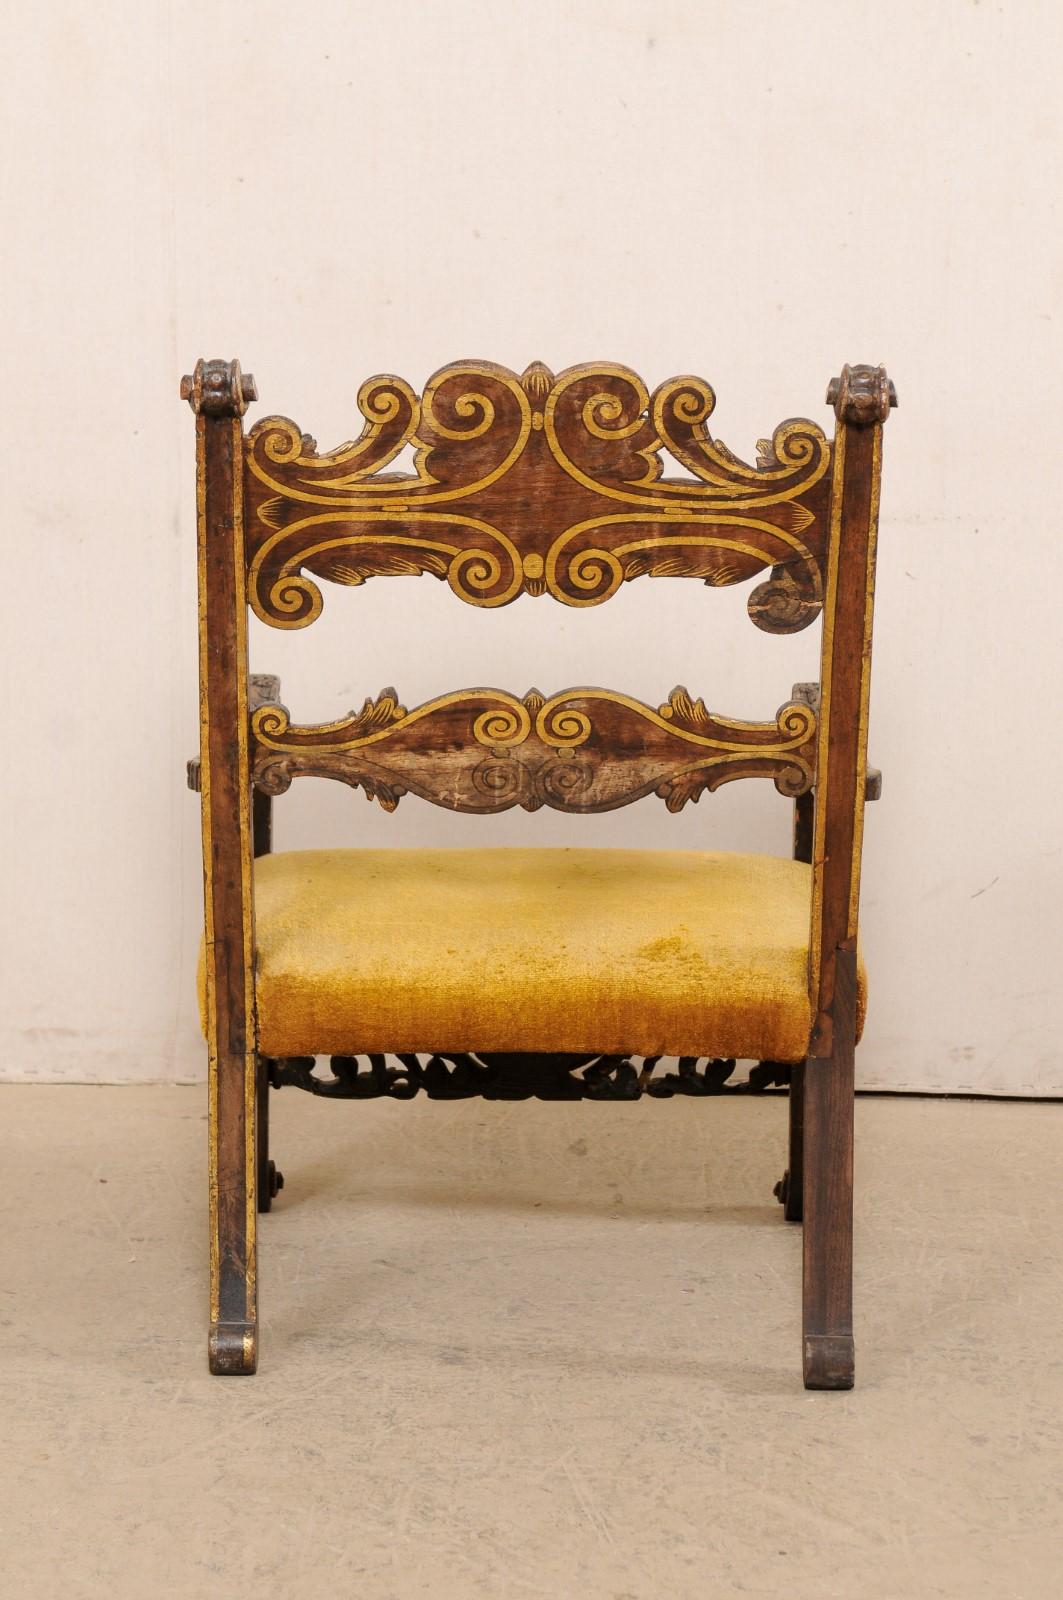 Wood Handsome 18th C Italian Baroque Arm Chair with Intricately Carved Details For Sale